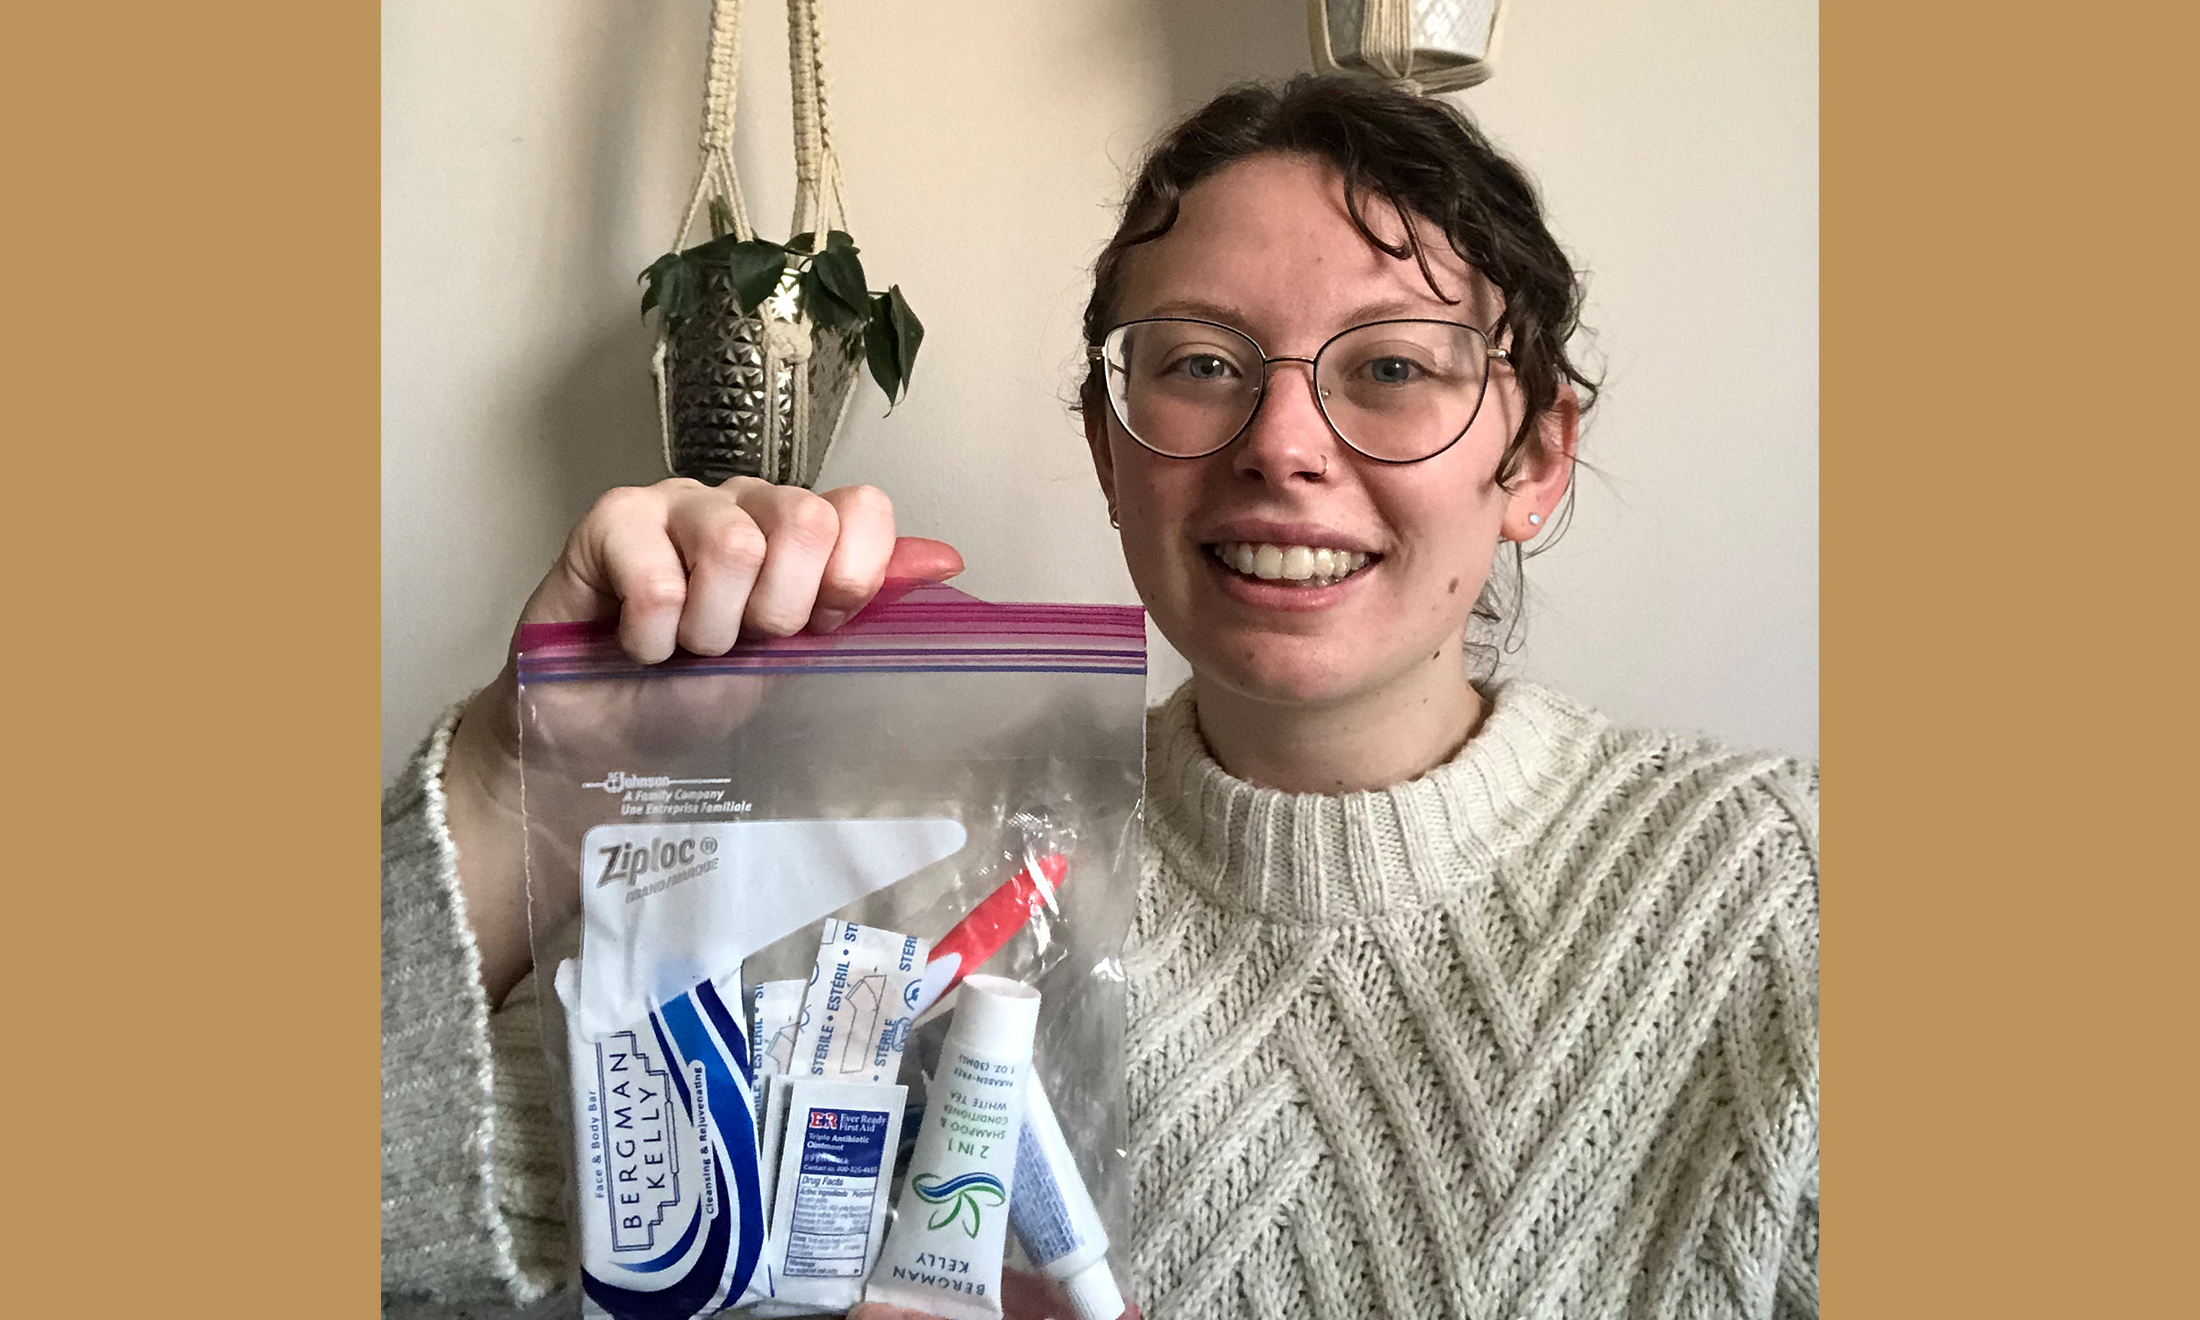 An image of a student holding one of the hygiene kits